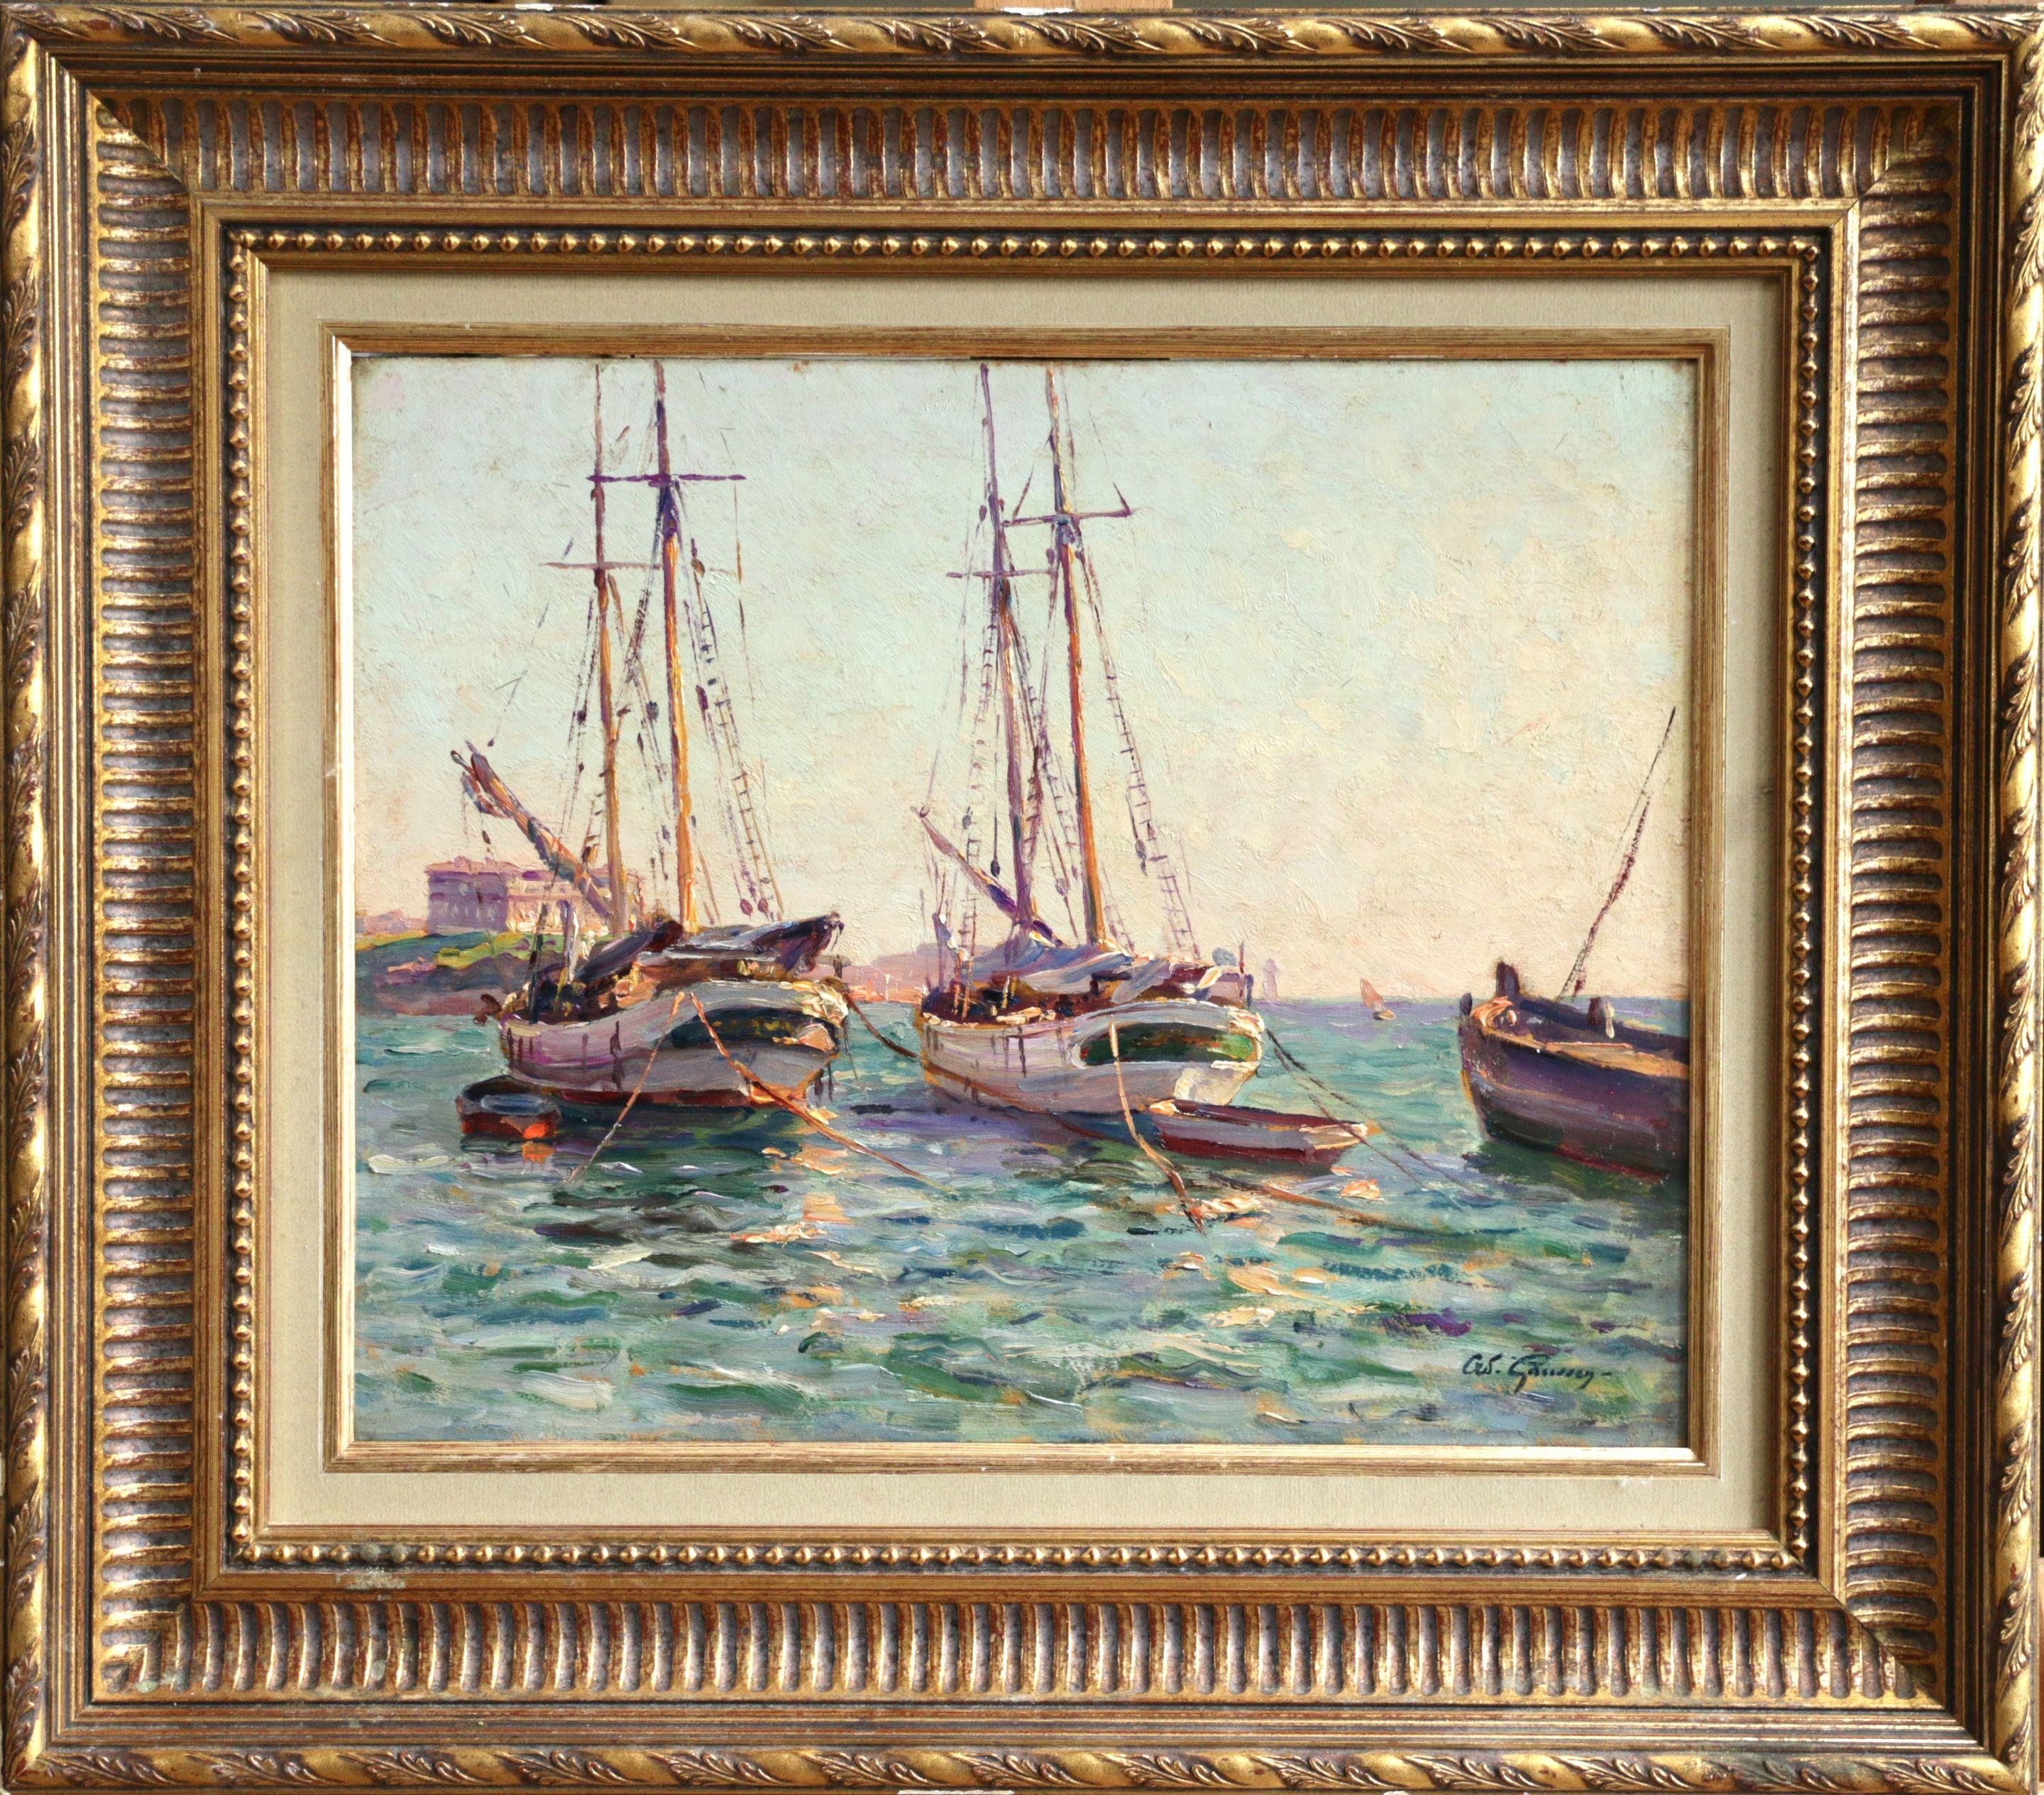 Bateaux à L'ancre - Marseille - 19th Century Marine Oil, Boats in Sea by Gaussen - Painting by Adolphe Louis Gaussen